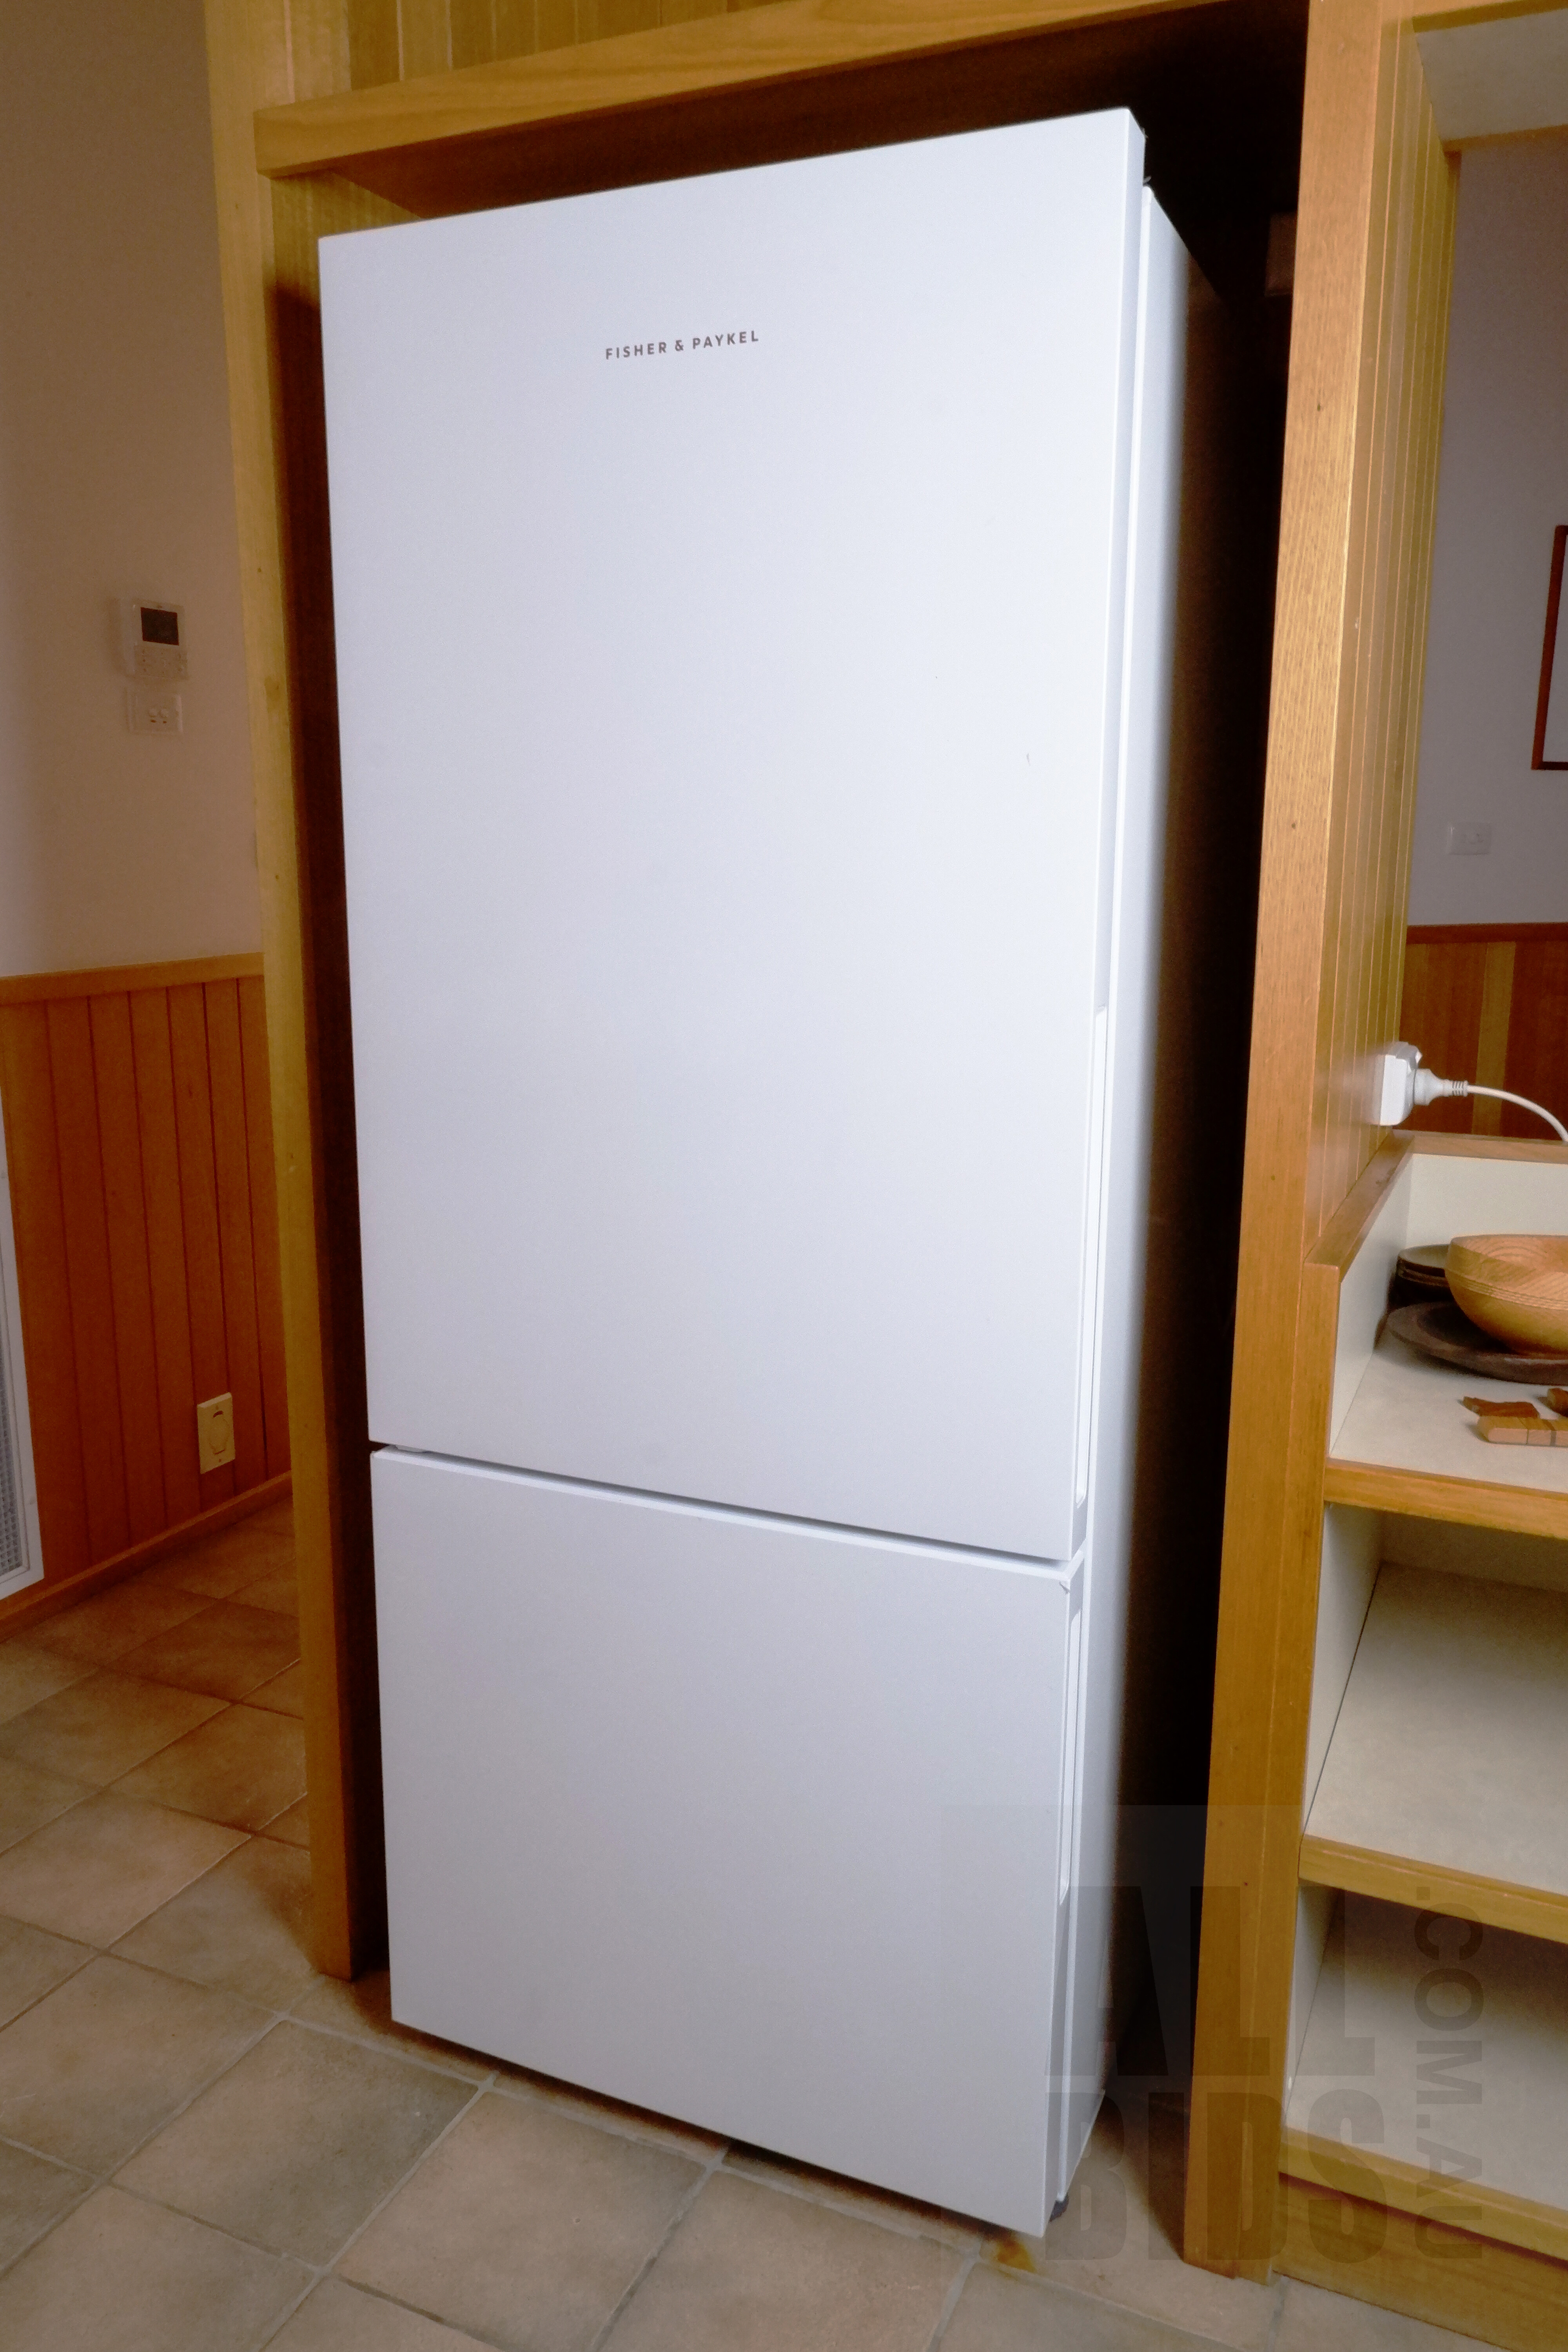 'Fisher and Paykel Model RF4422BLPW6 Refrigerator'